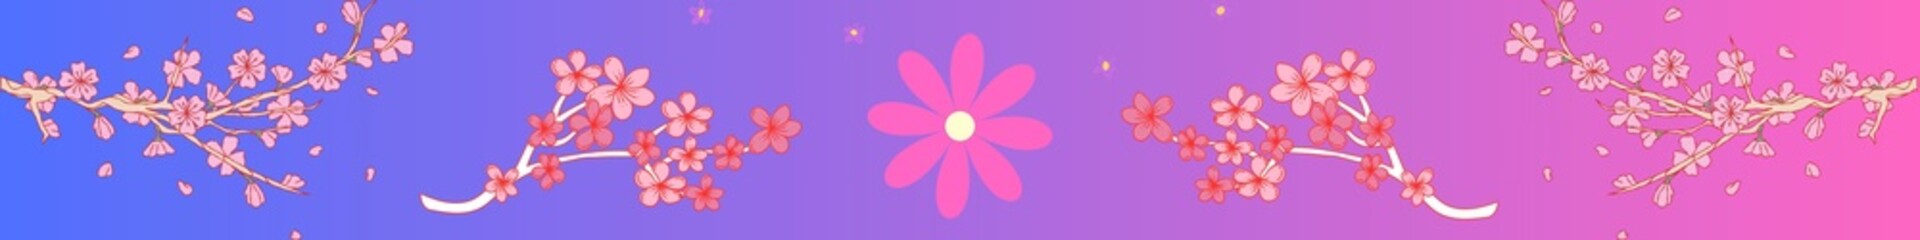 Pink and purple floral, leaf and petals on gradient background. Horizontal frame art beautiful design 